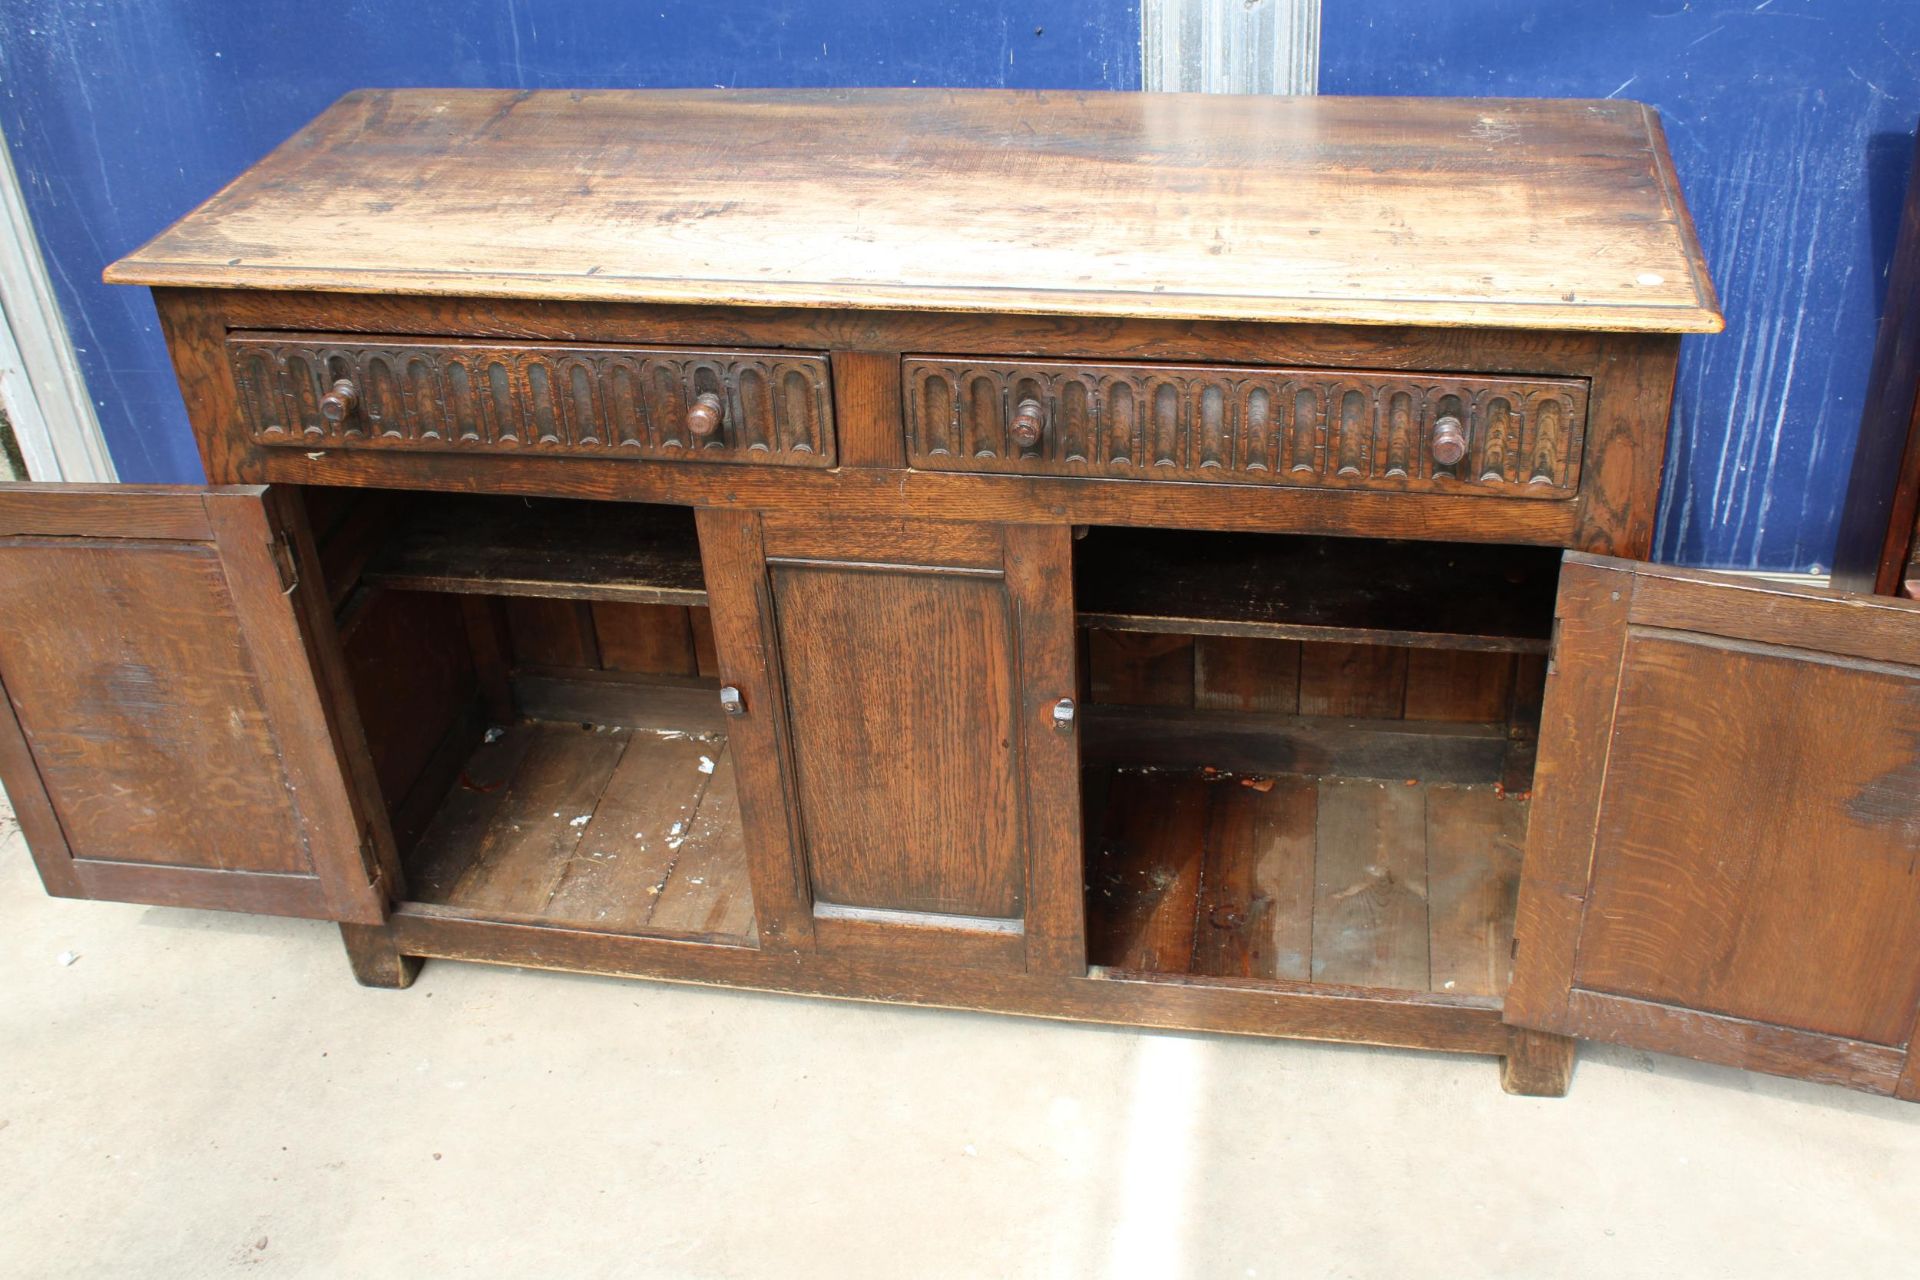 AN OAK JACOBEAN STYLE DRESSER BASE WITH CARVED PANEL DOORS AND DRAWERS, 51" WIDE - Image 3 of 3